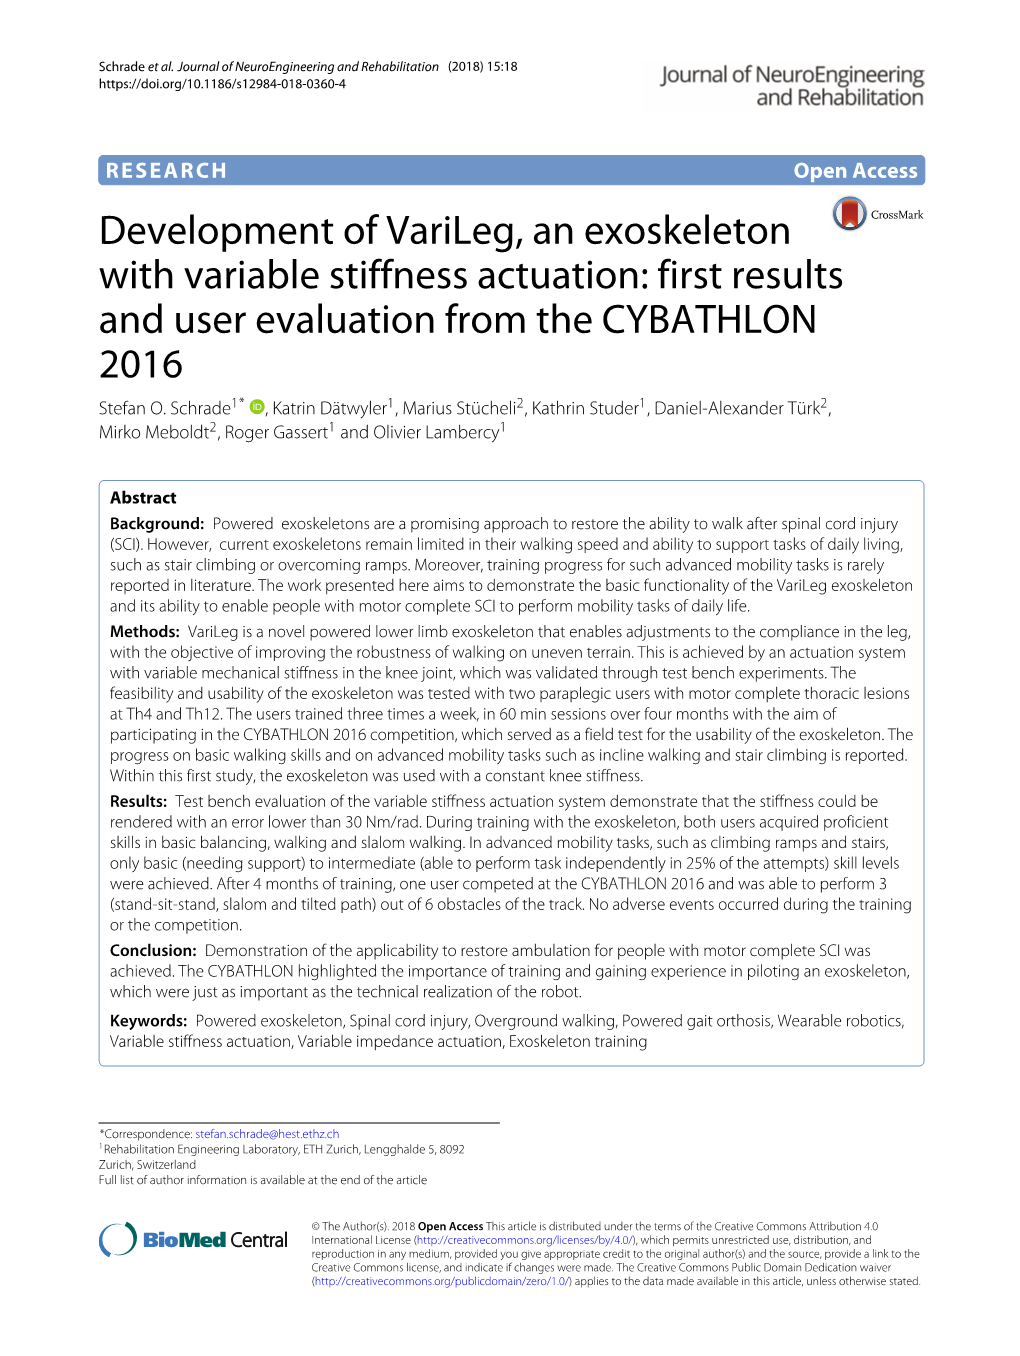 Development of Varileg, an Exoskeleton with Variable Stiffness Actuation: First Results and User Evaluation from the CYBATHLON 2016 Stefan O